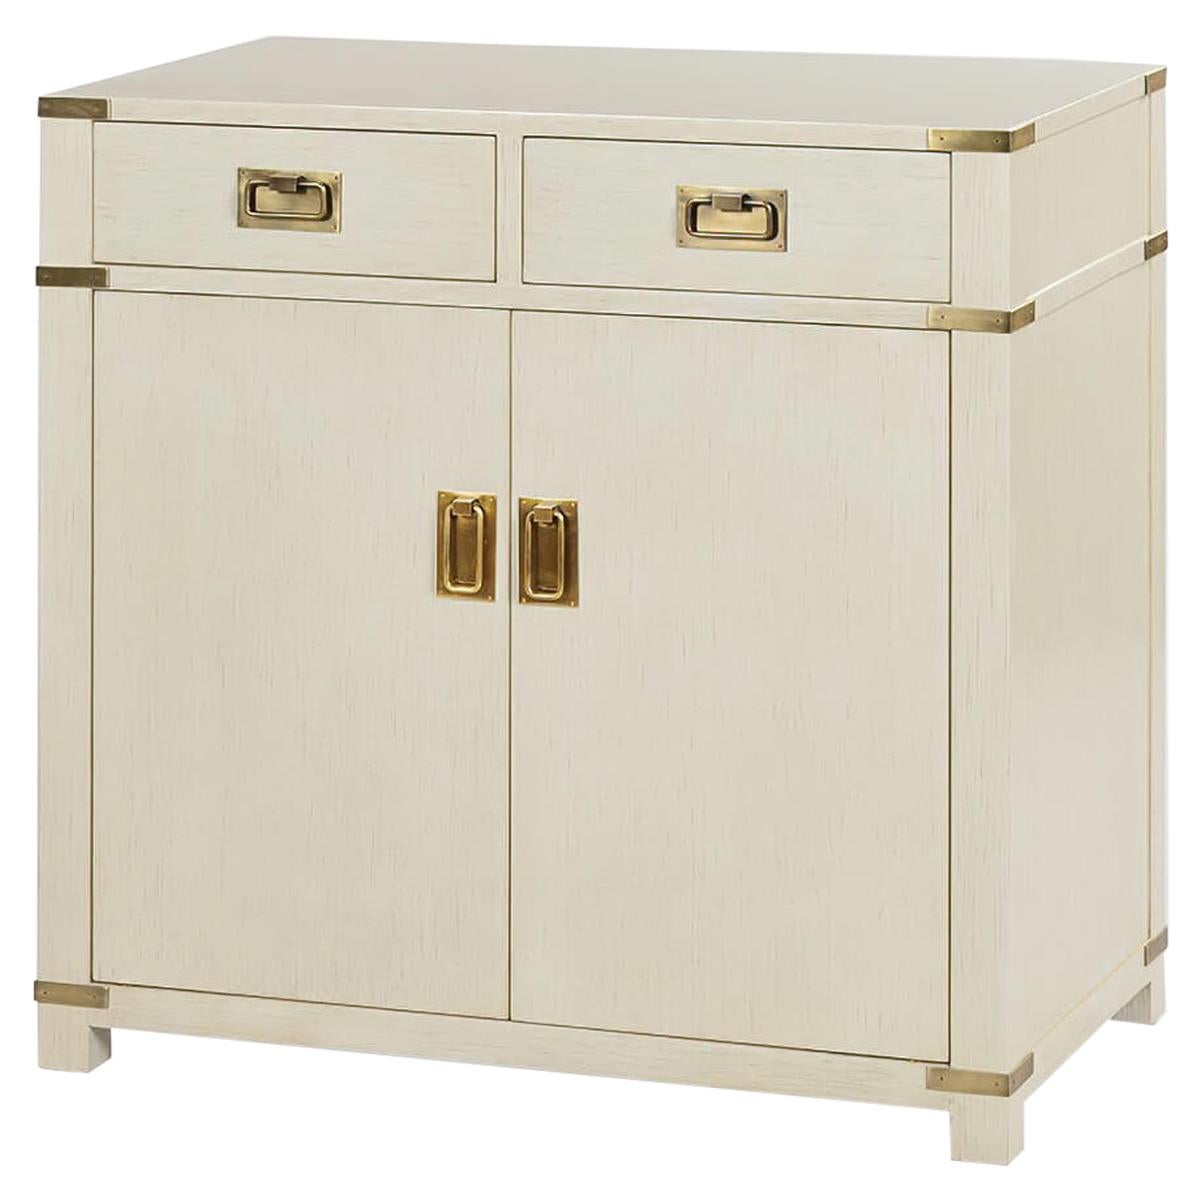 Campaign Style Cabinet, Drift White